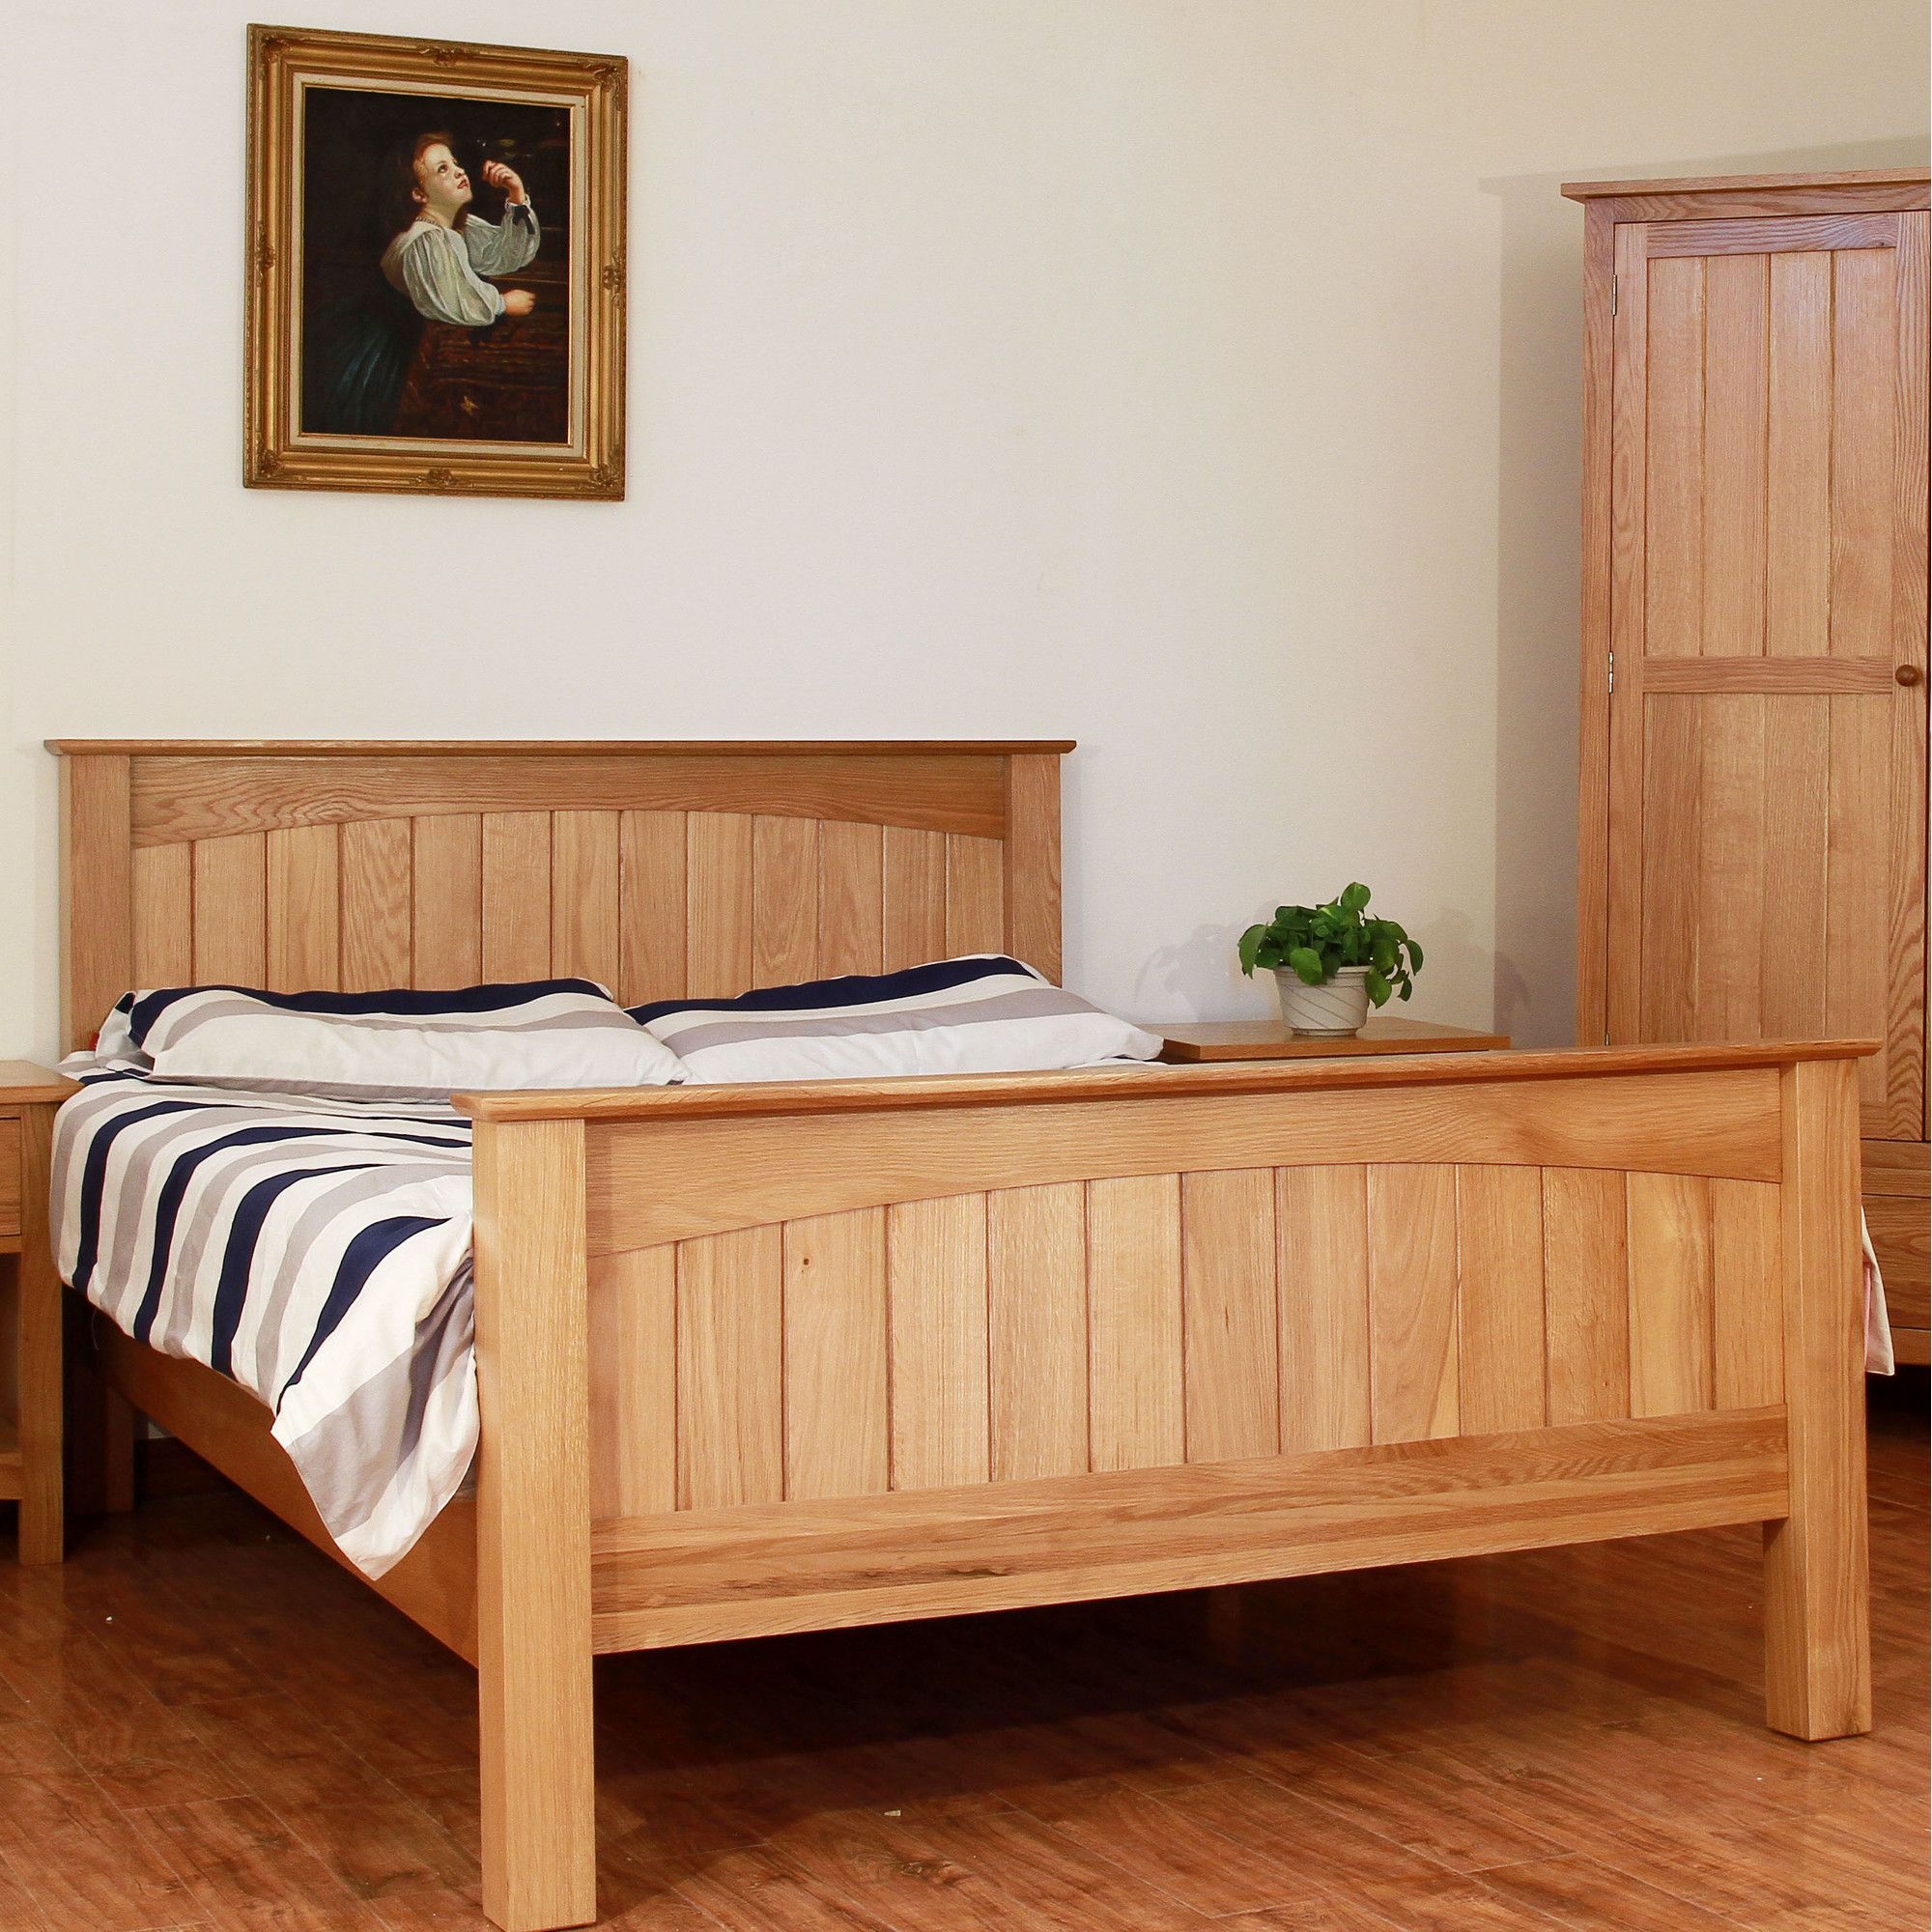 Elements Farmhouse Bed Frame - King at Tesco Direct